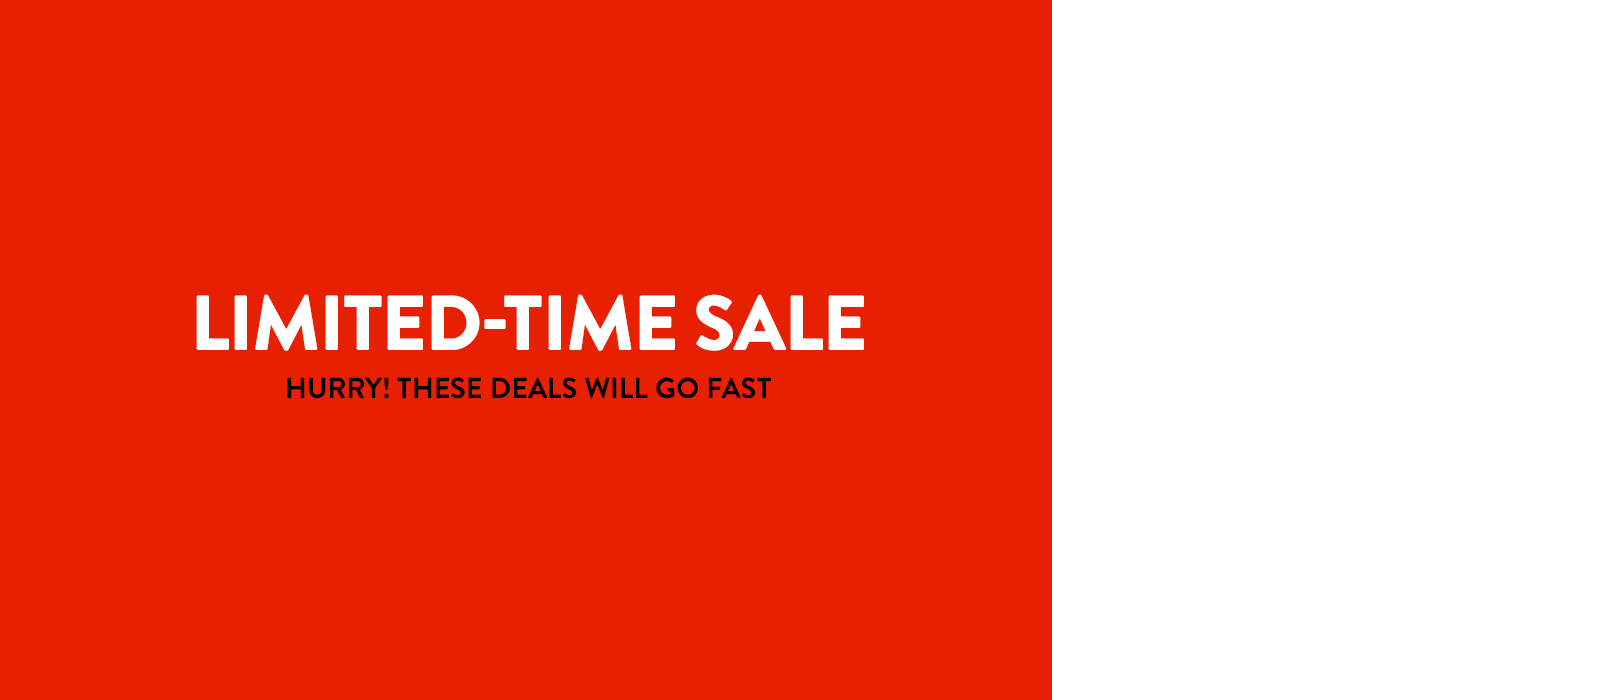 Limited-time sale. Hurry—these deals will go fast!